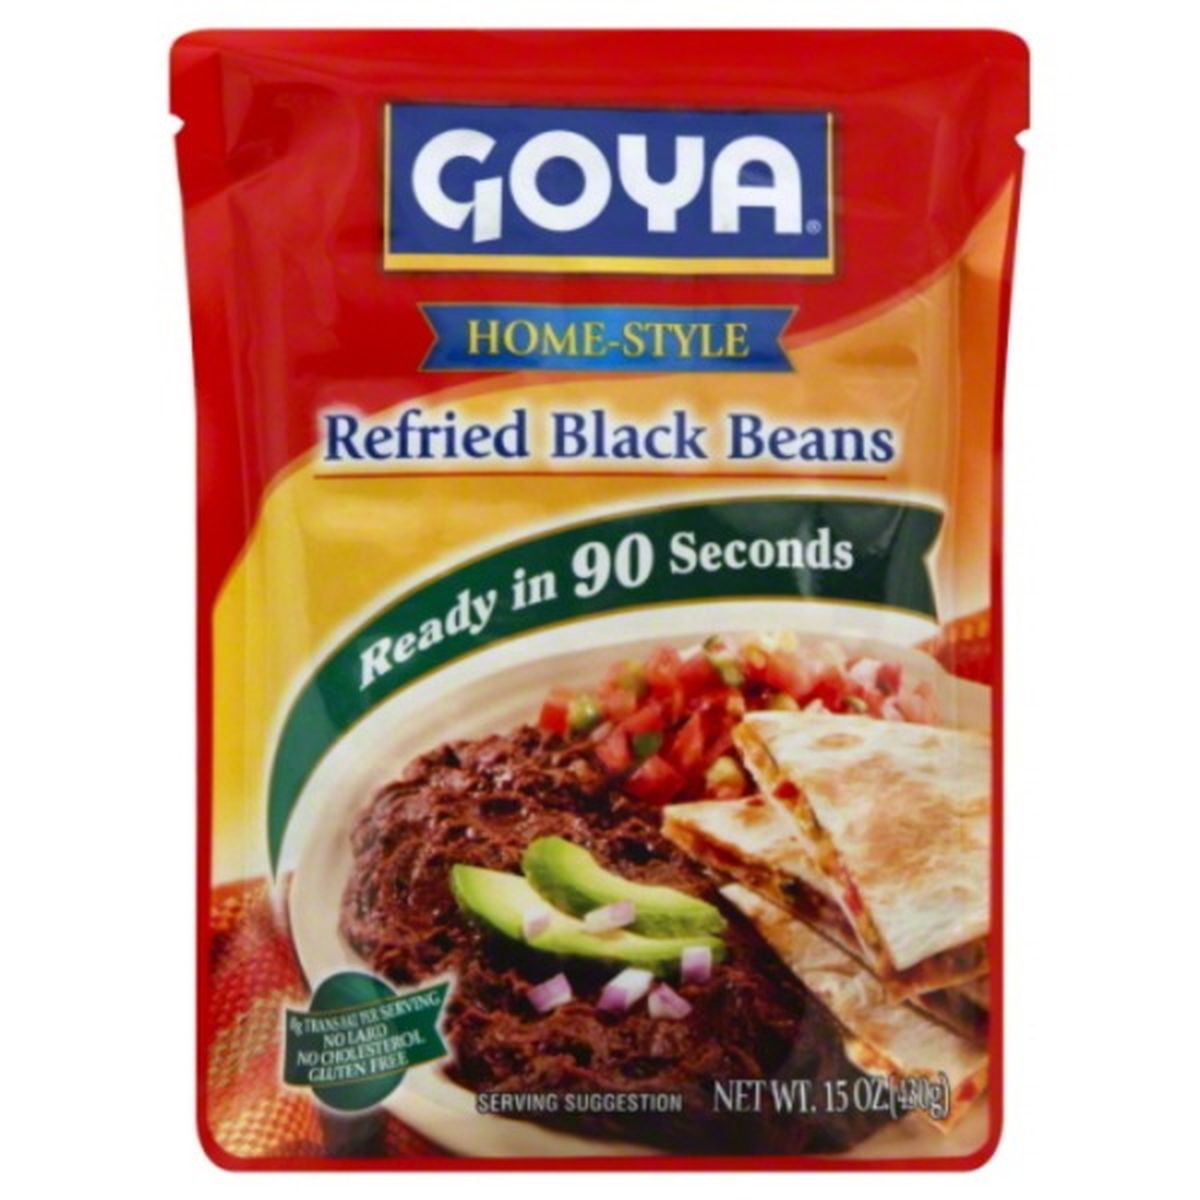 Calories in Goya Black Beans, Refried, Home-Style